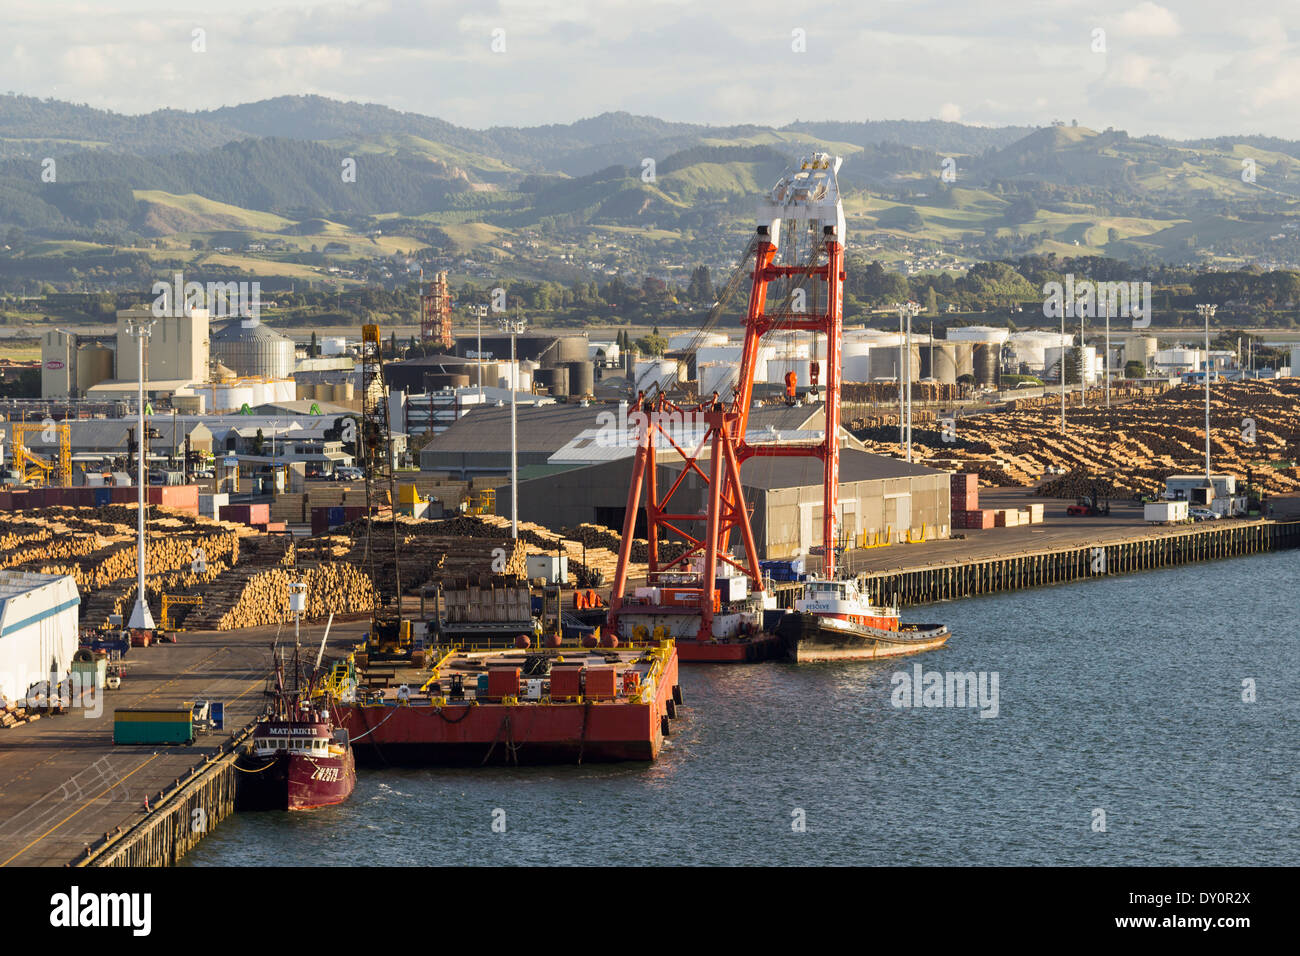 Tauranga, New Zealand - port area with timber for export stacked on the wharf at dusk Stock Photo